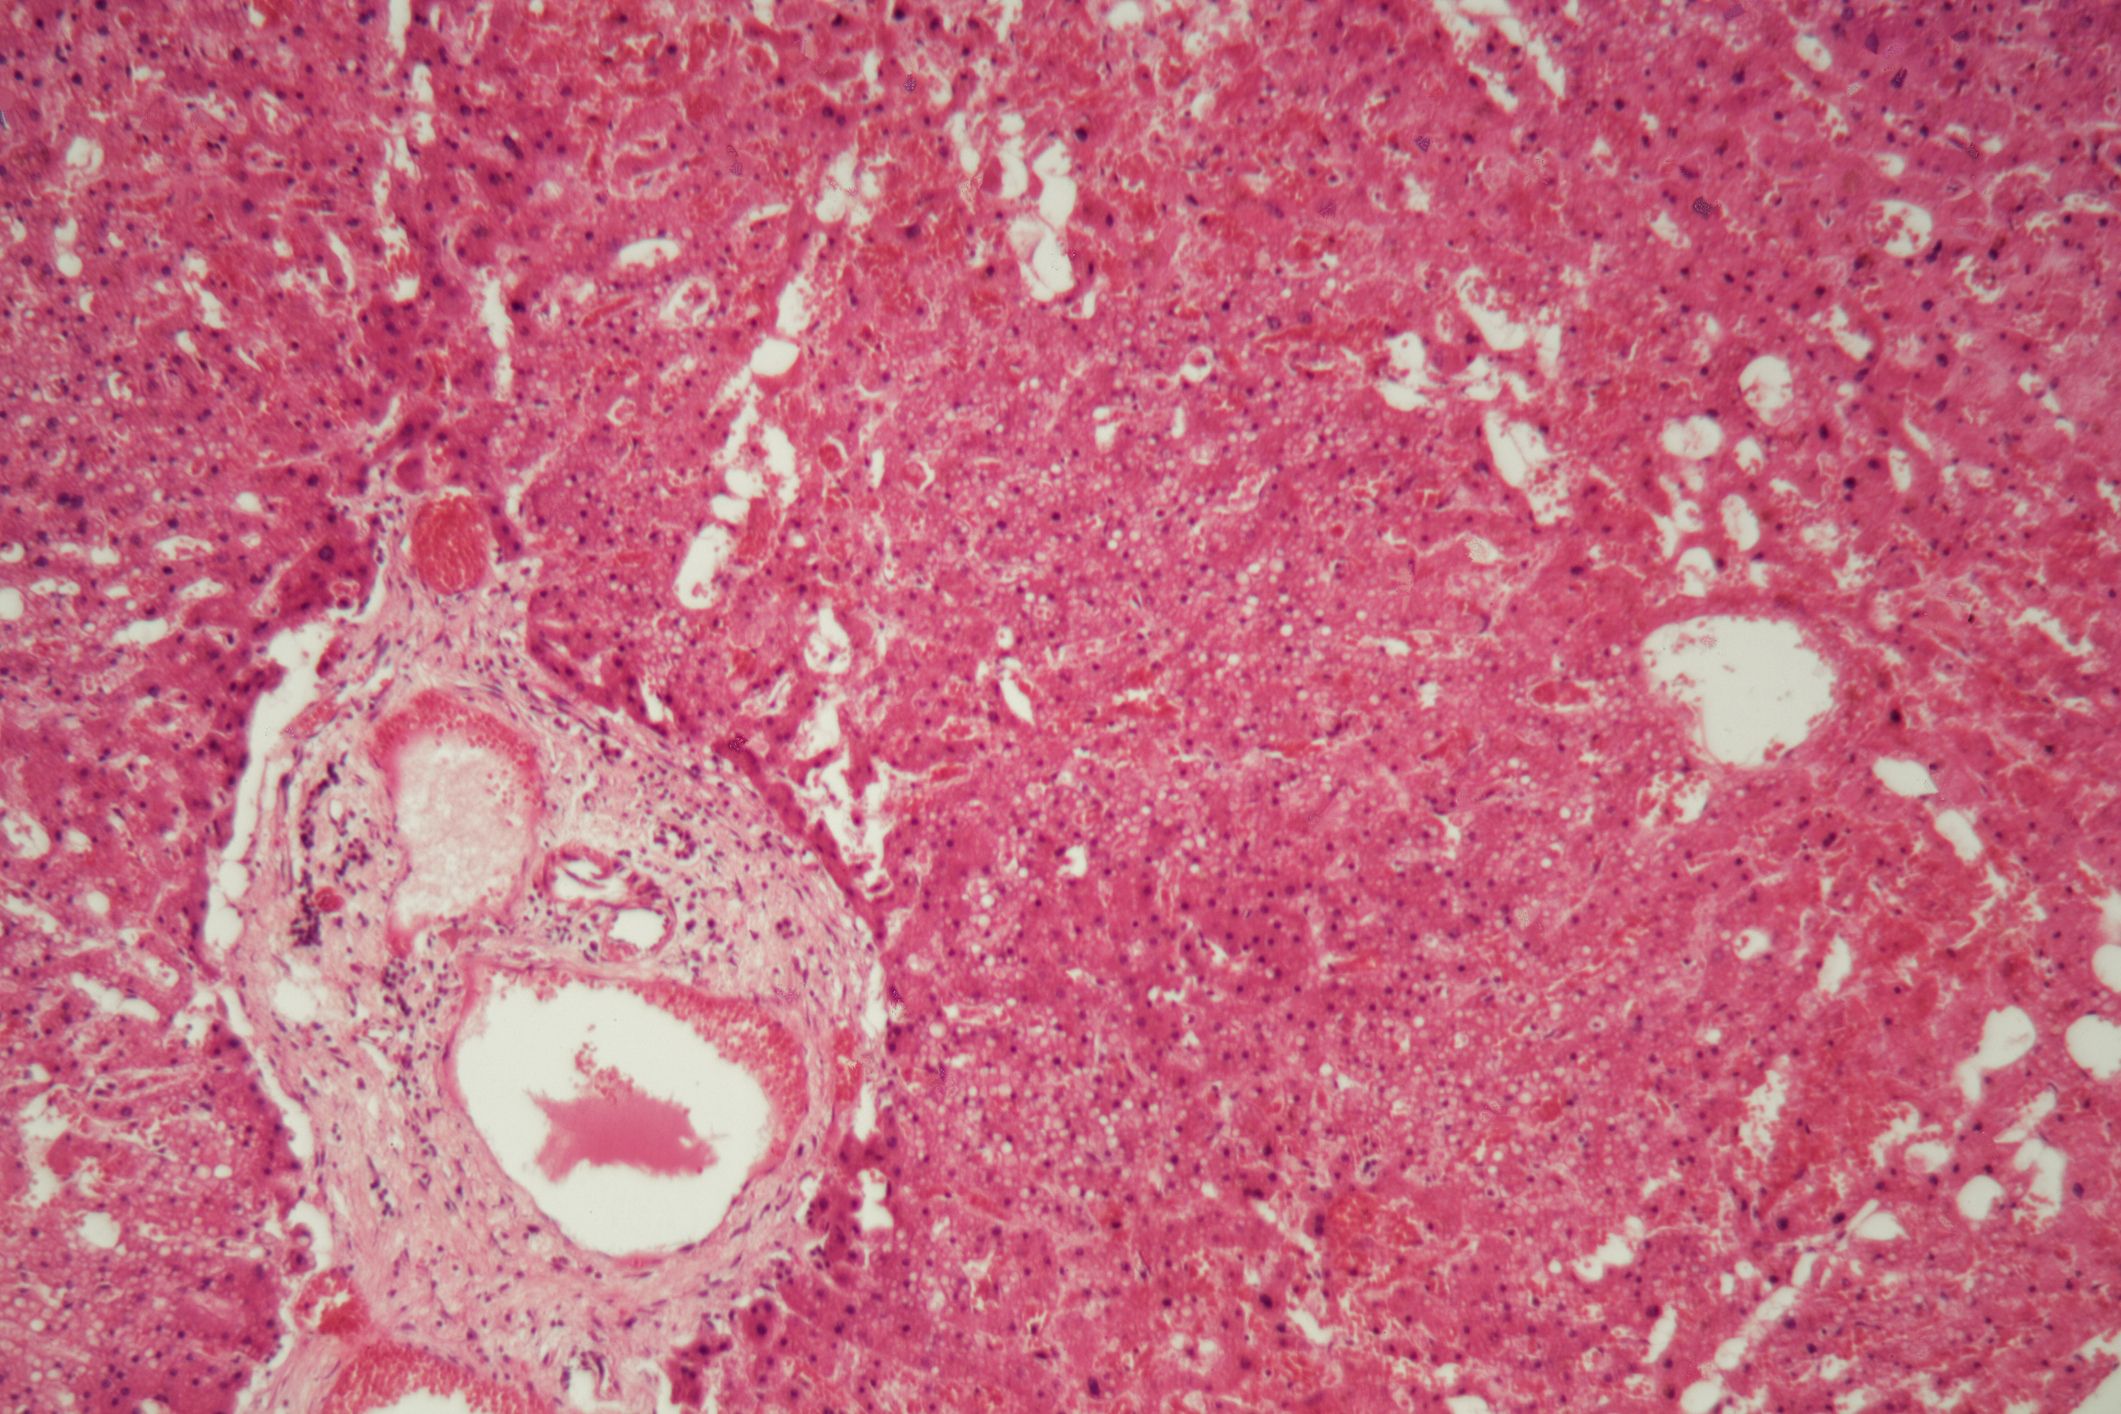 Human liver tissue with Amyloidosis under a microscope.